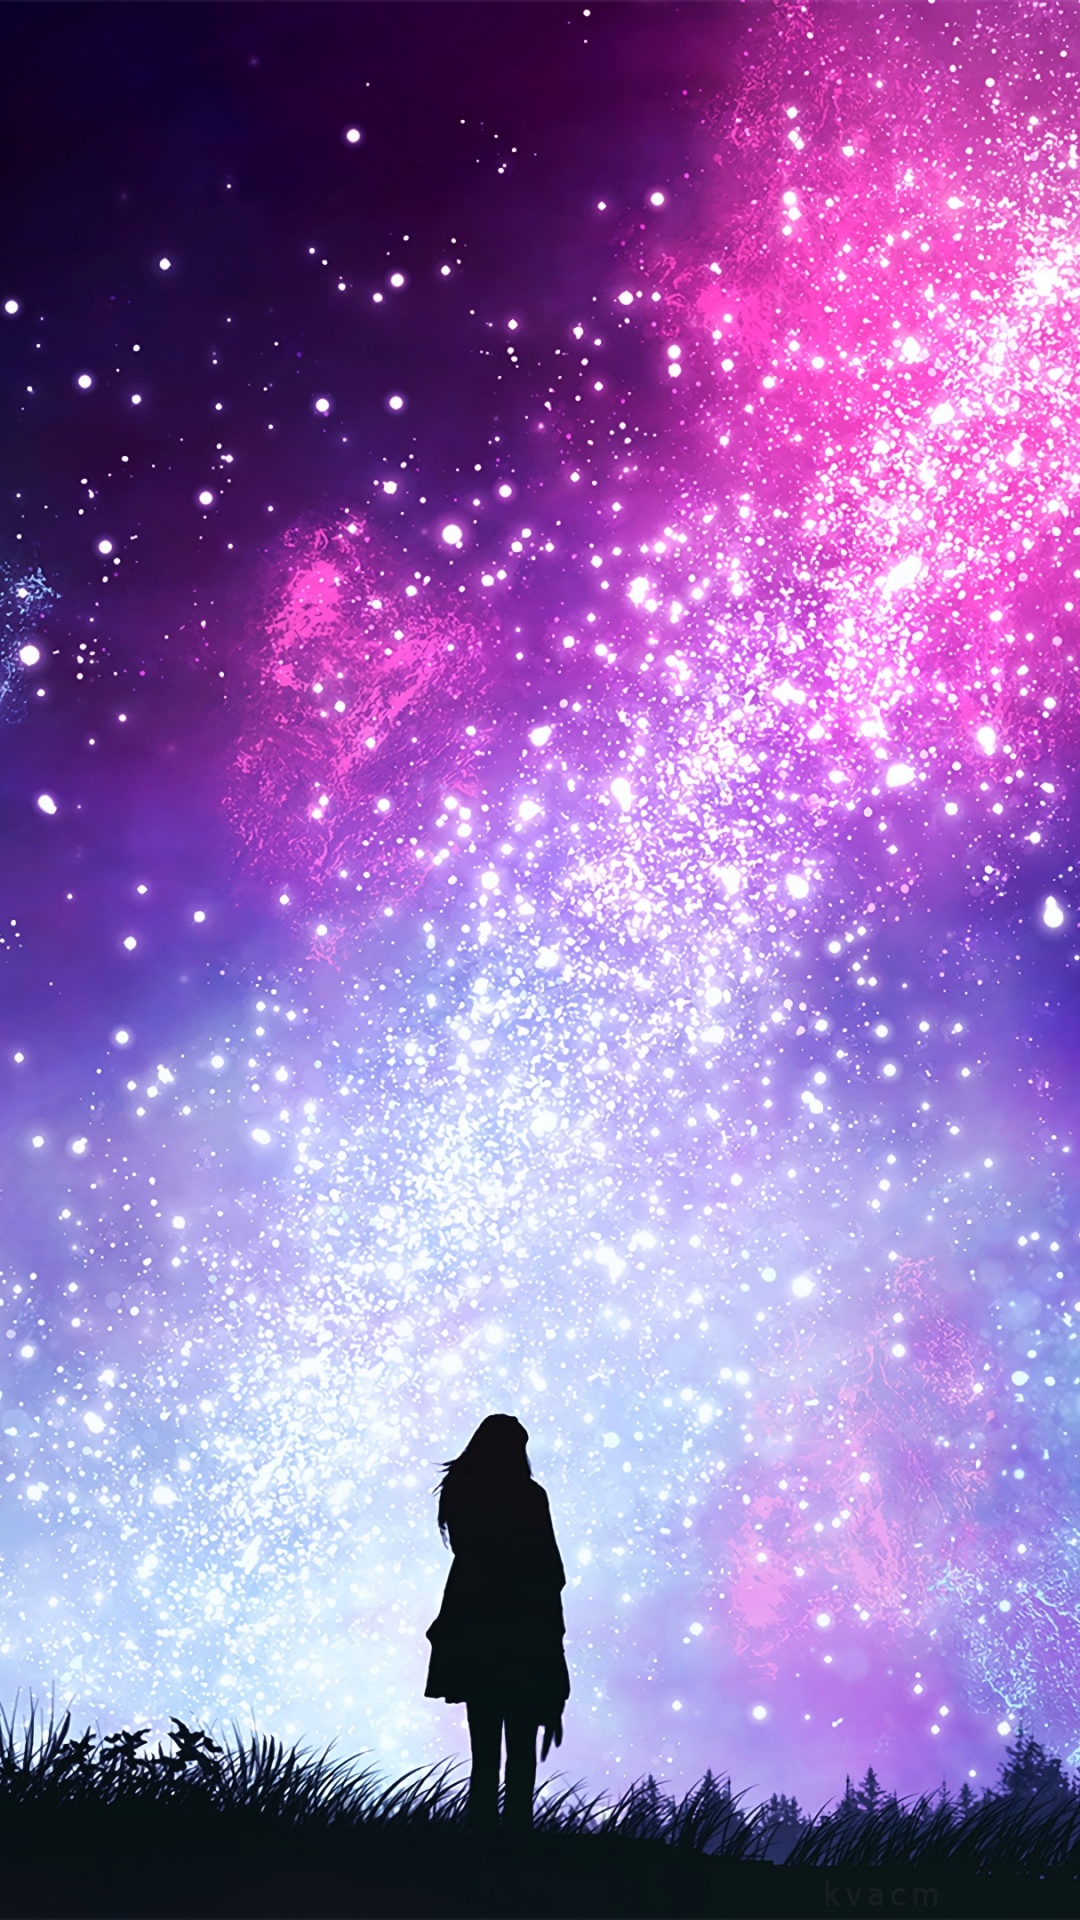 Silhouette of Man and Woman Under Purple Sky. Wallpaper in 1080x1920 Resolution